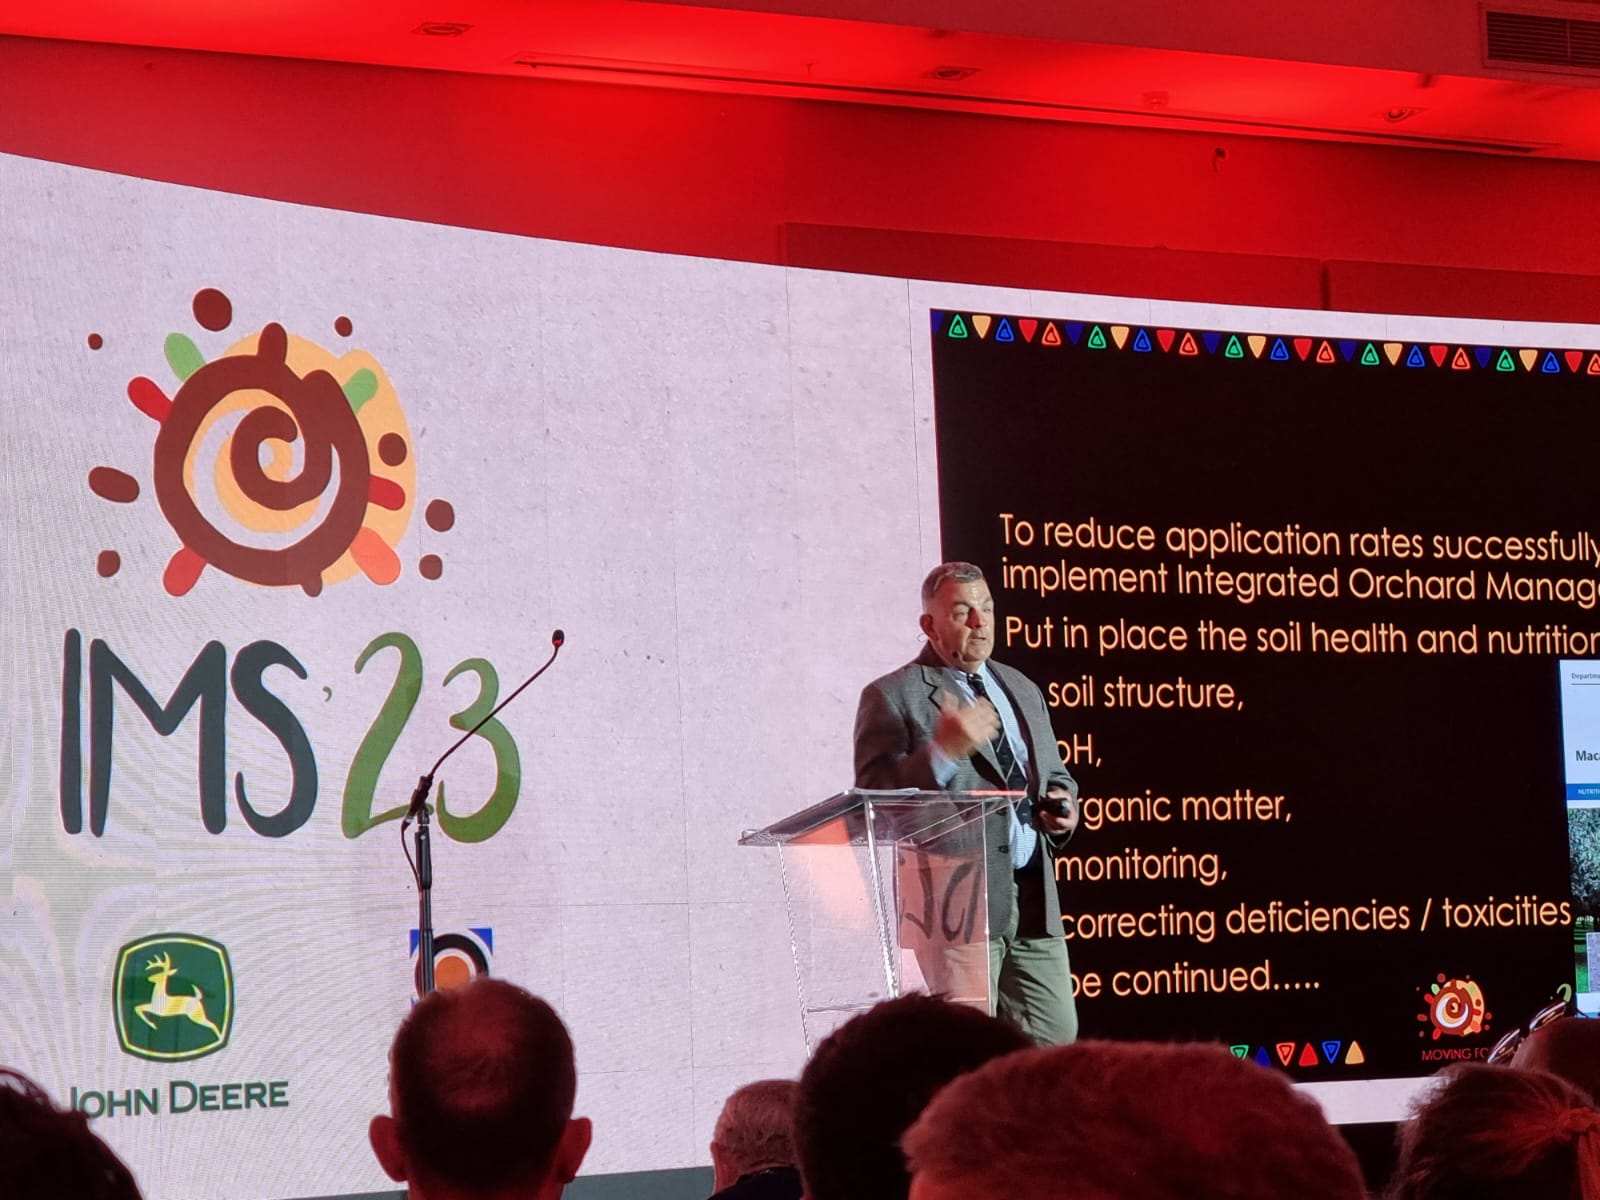 Man in suit on stage addressing audience with IMS 23 logo in the background